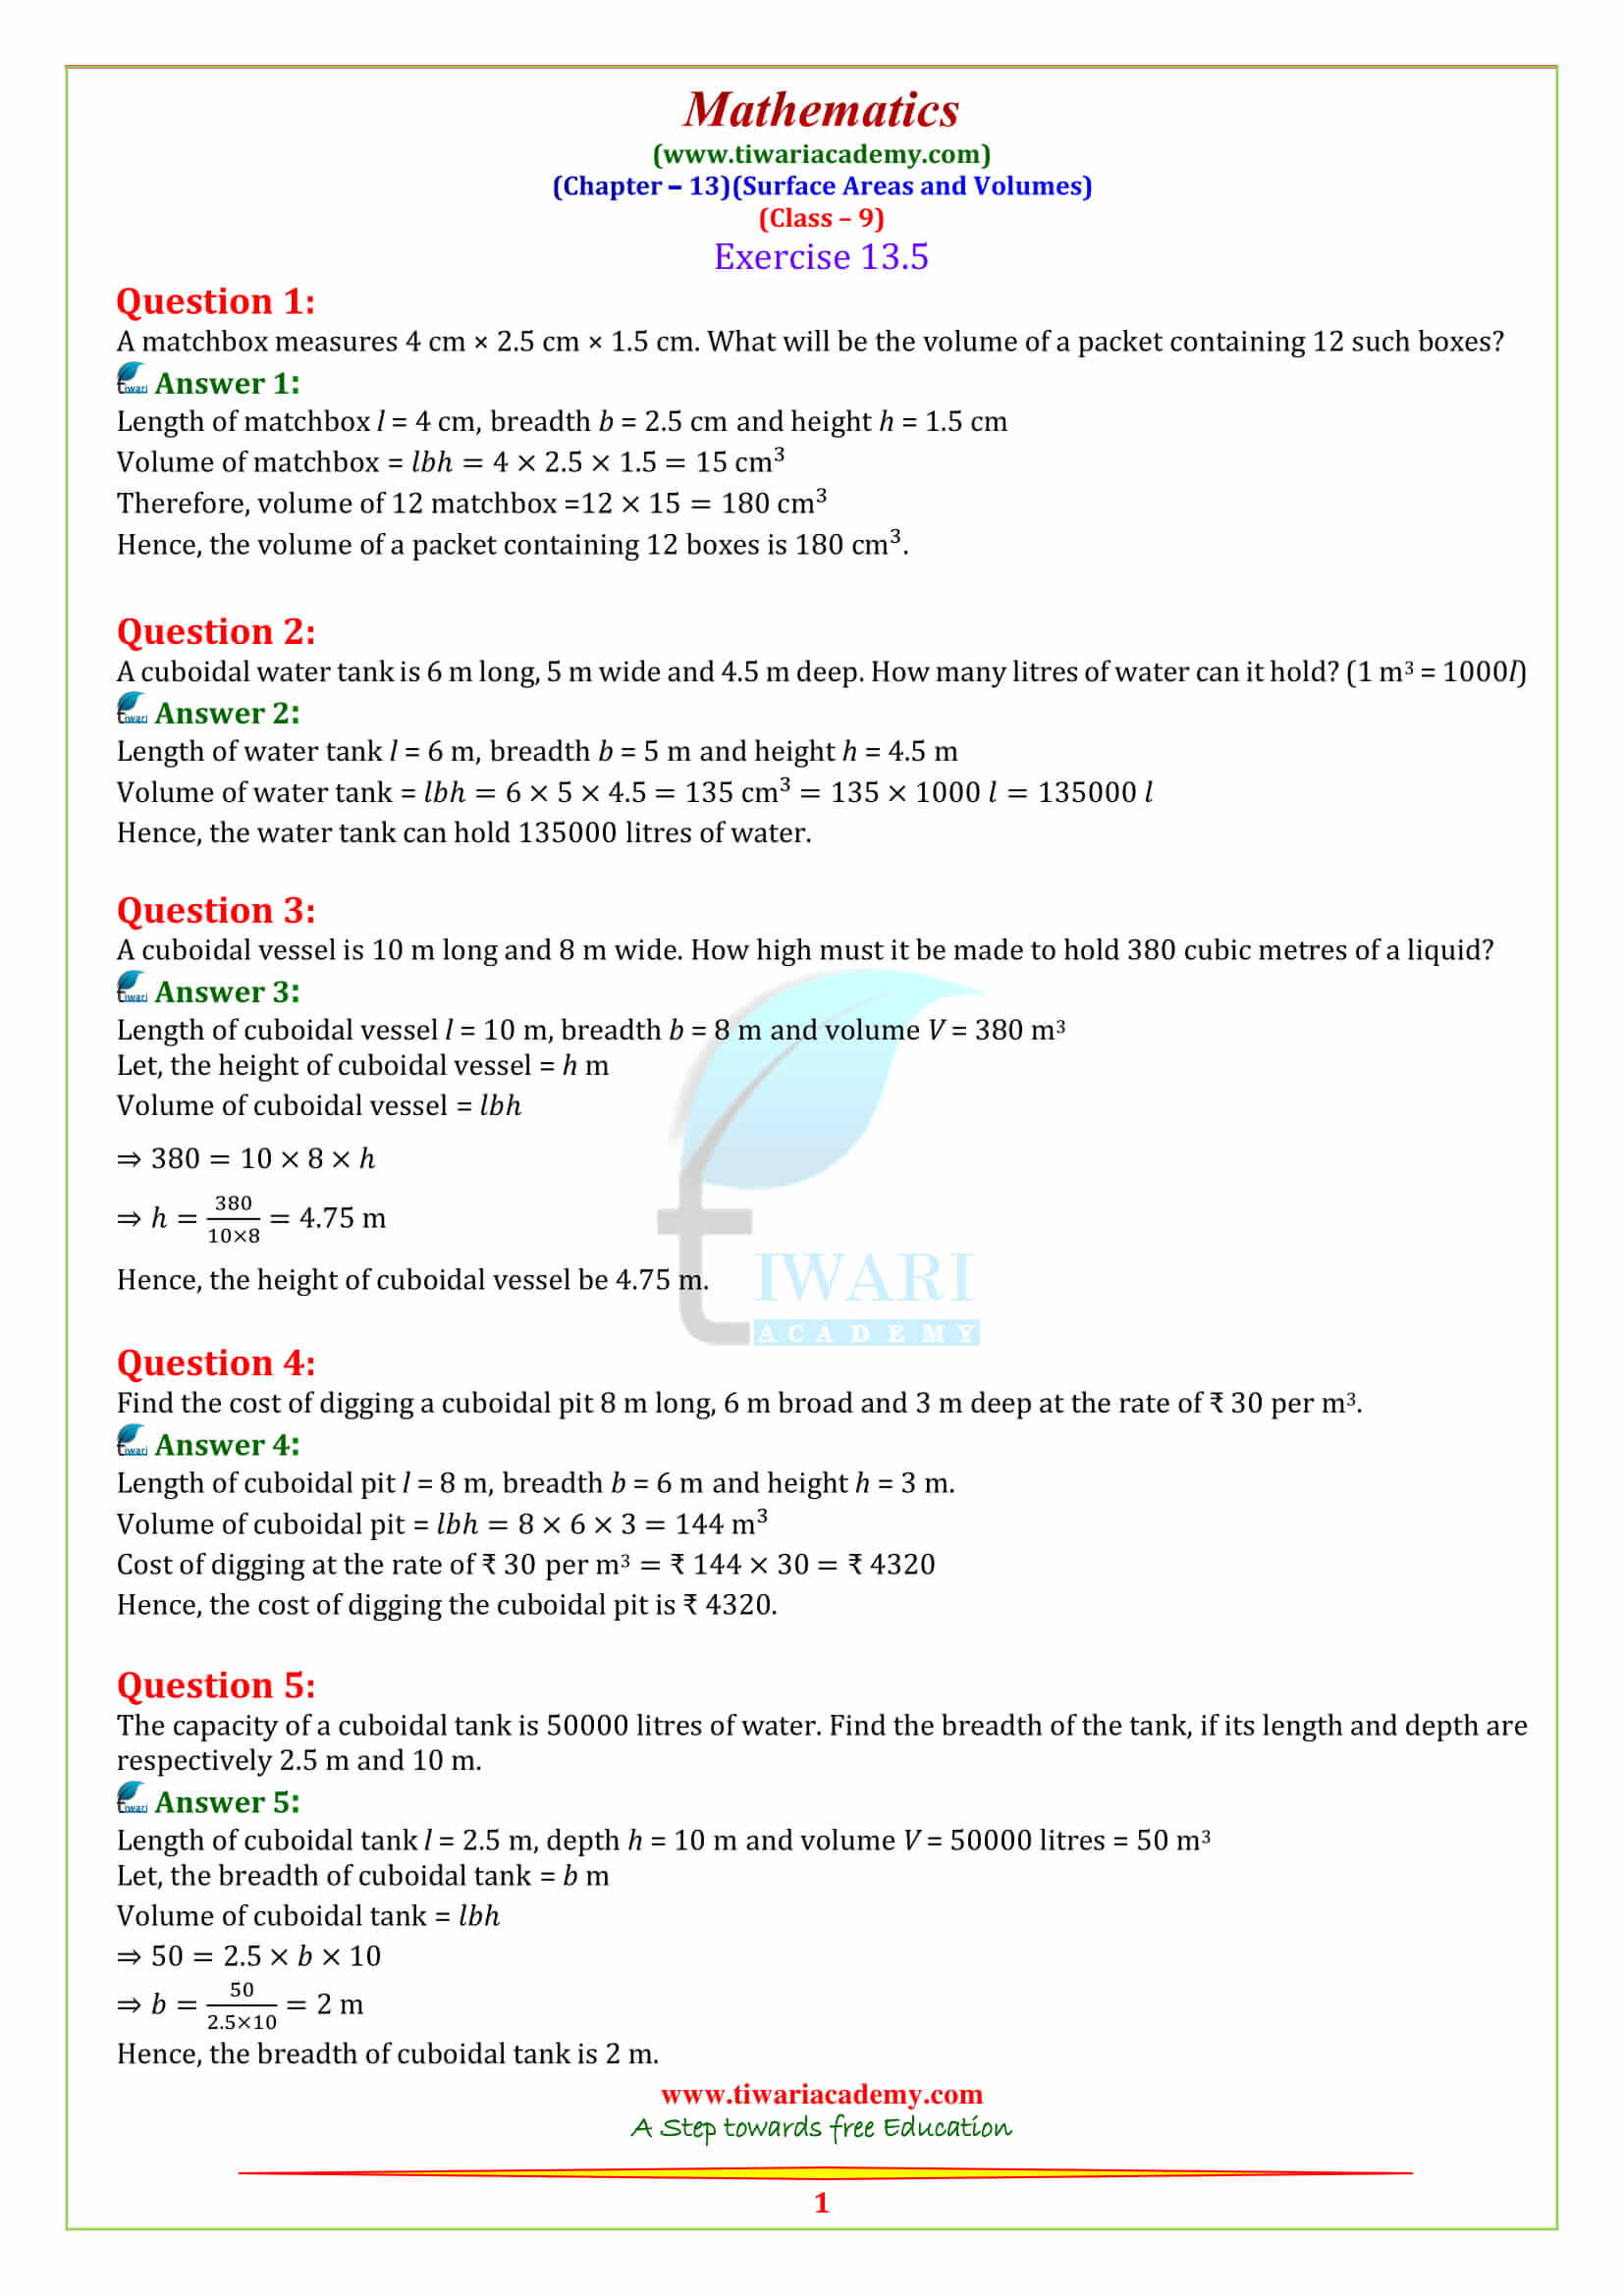 9 Maths Chapter 13 Surface Areas and Volumes Exercise 13.5 solutions in pdf